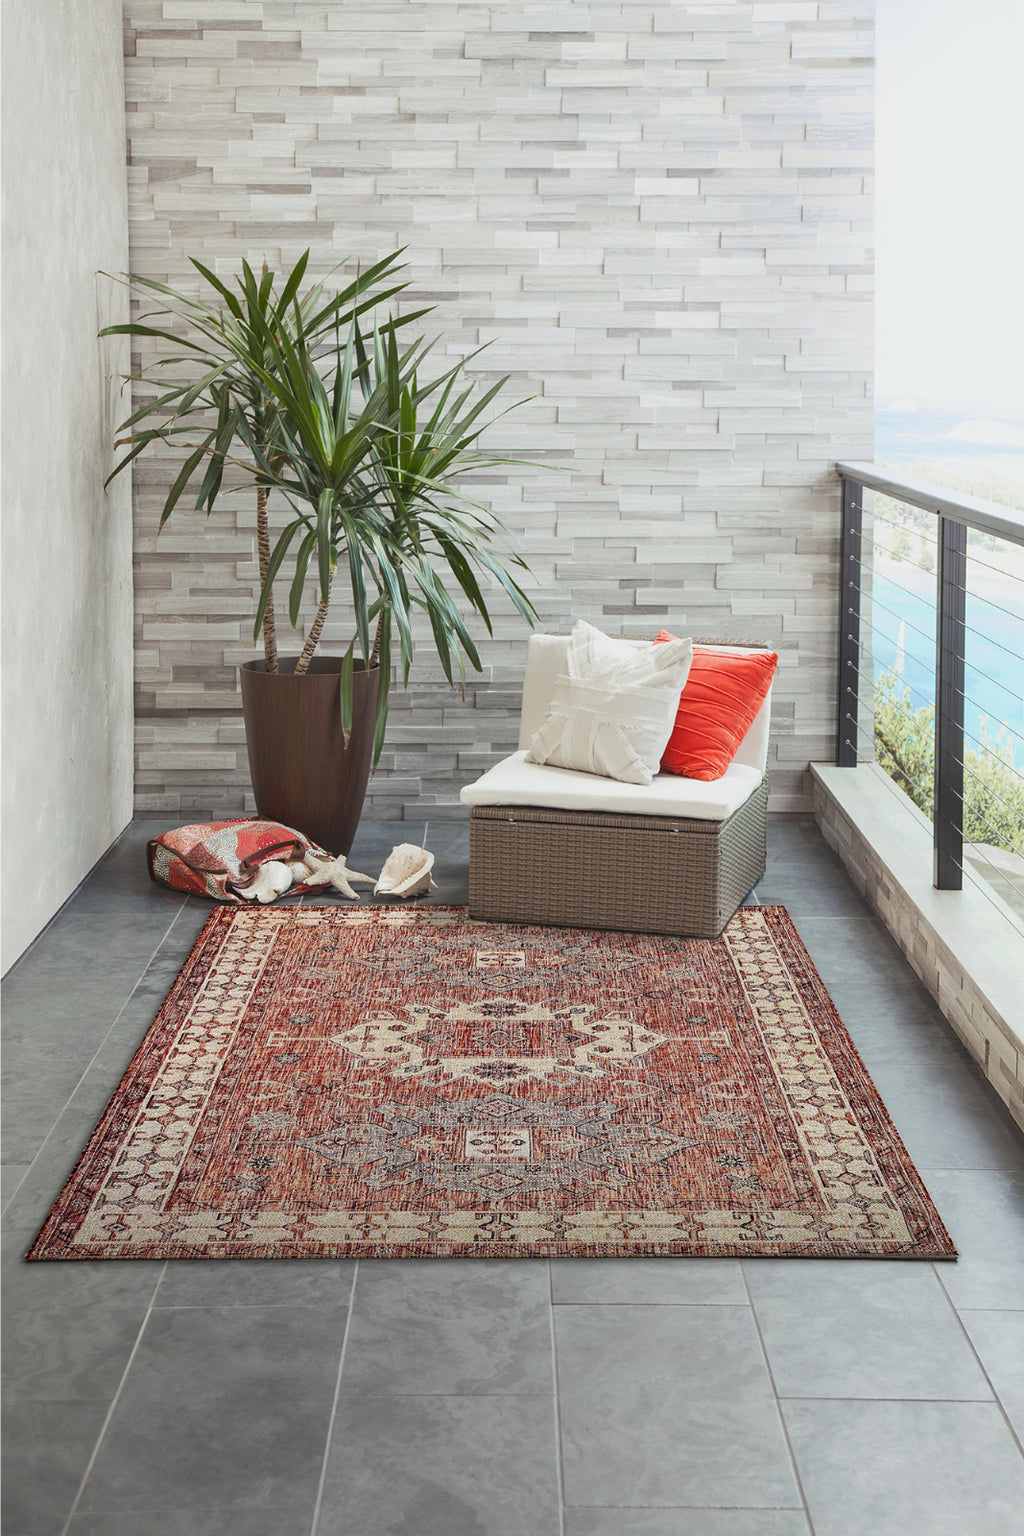 Trans Ocean Carmel 8409/24 Kilim Red Area Rug by Liora Manne Room Scene Image Feature